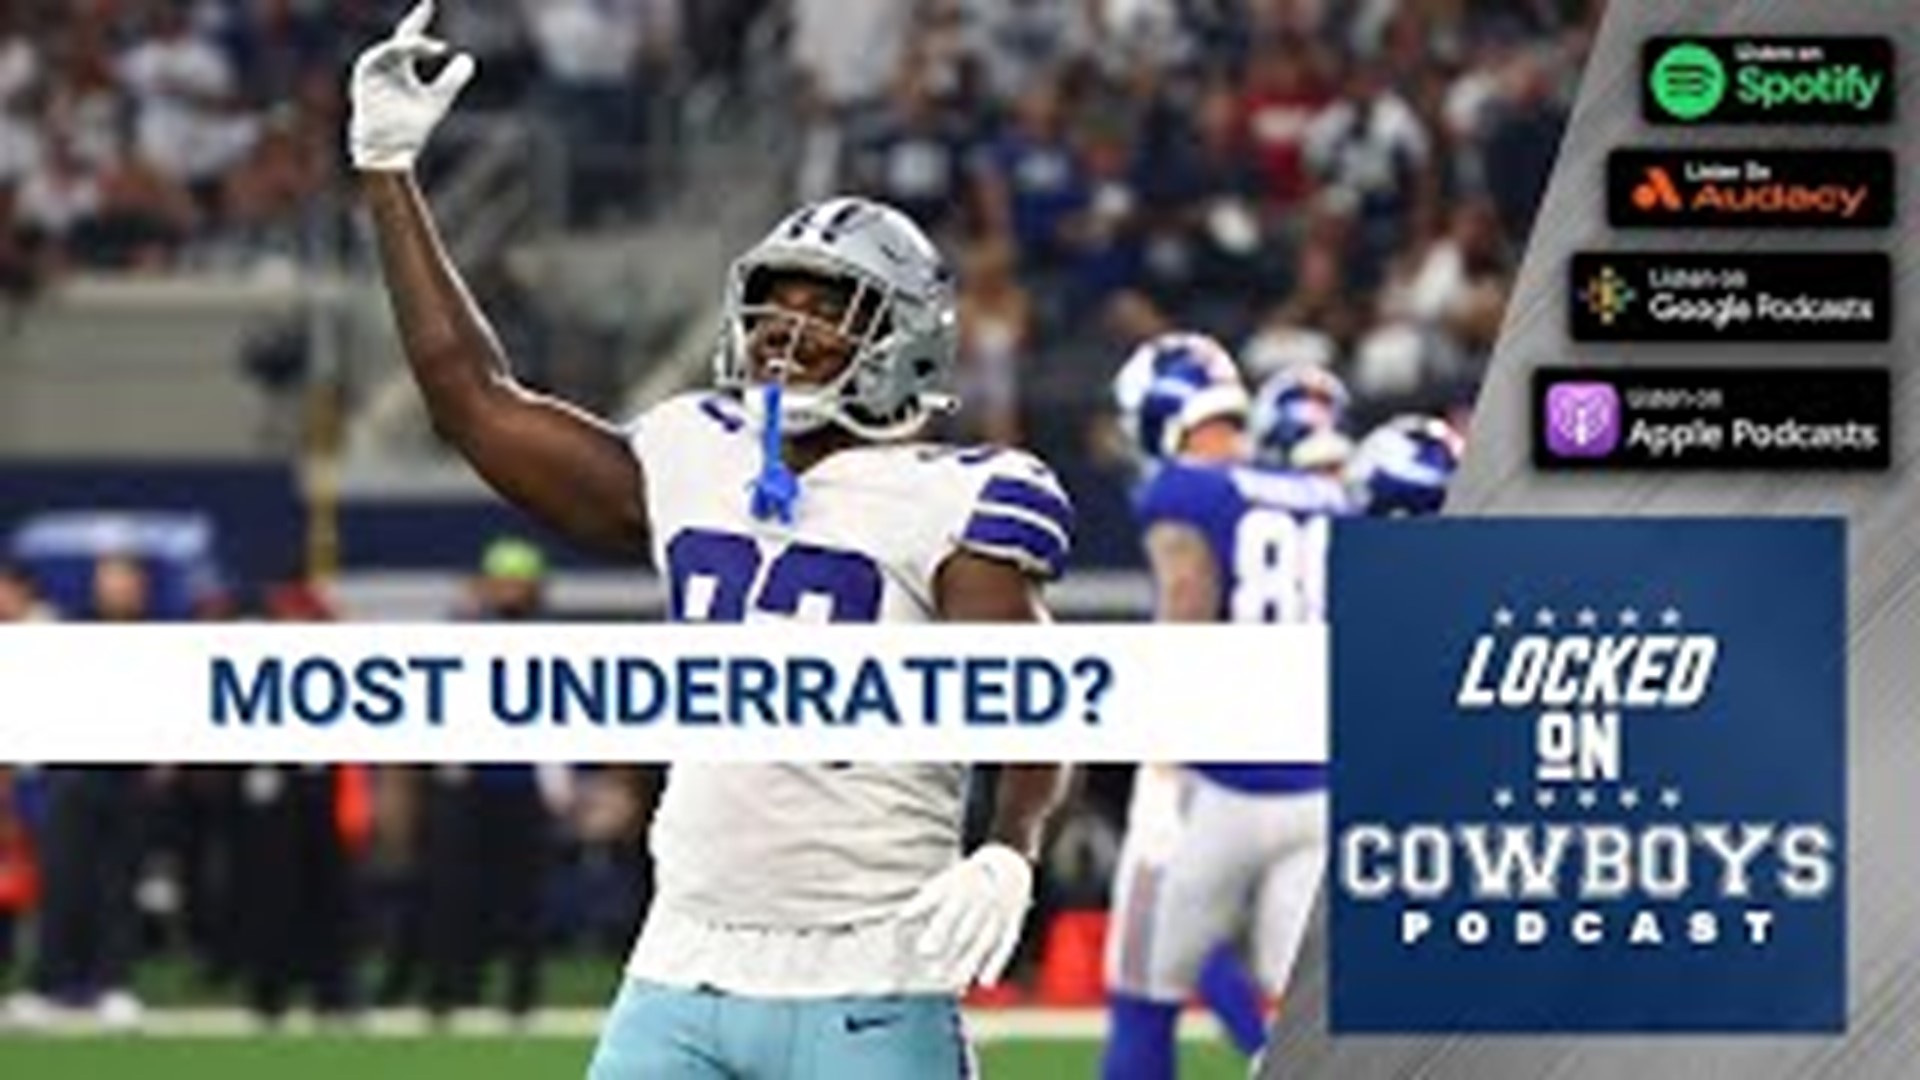 Marcus Mosher and Landon McCool of Locked On Cowboys discuss five players who are underrated and underappreciated for the Dallas Cowboys.